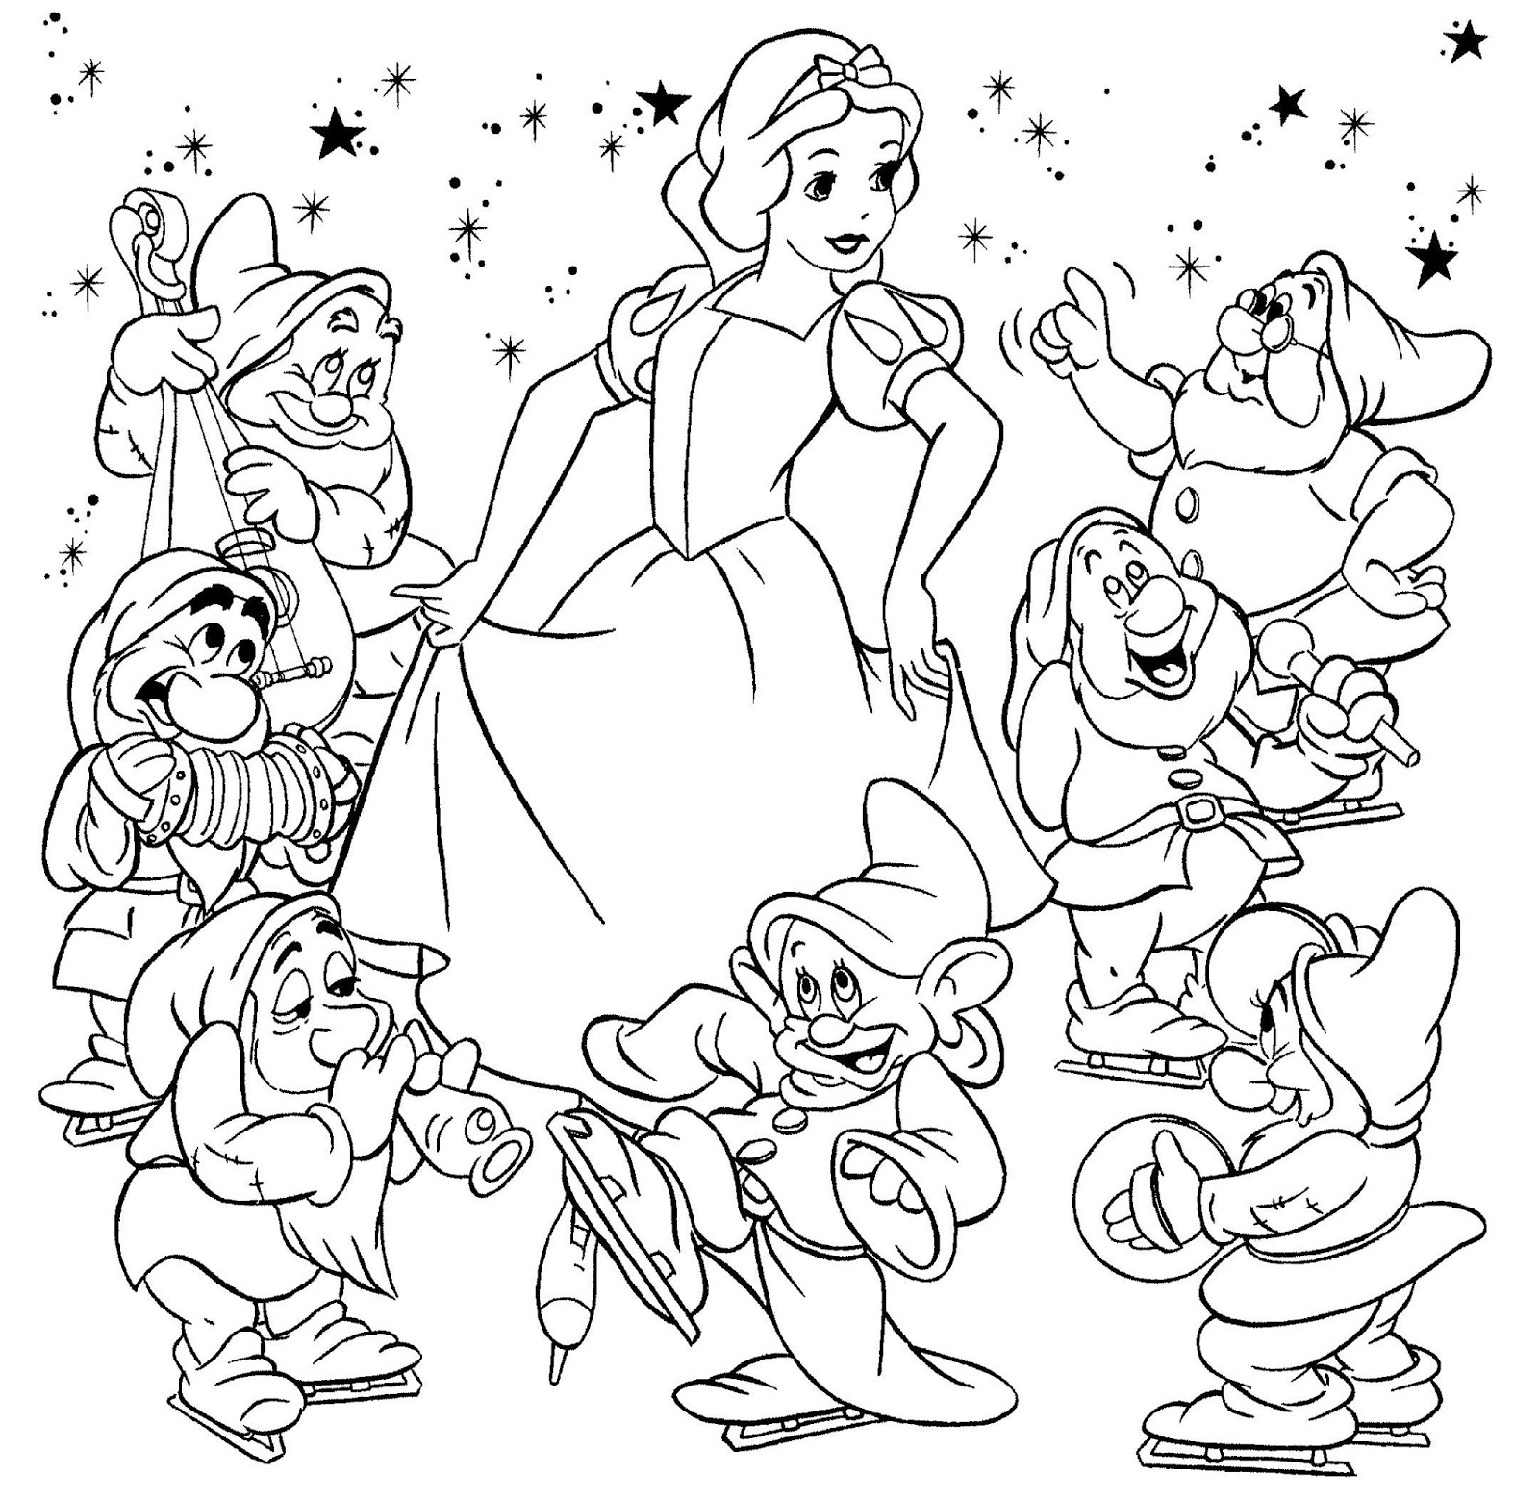 The Seven Dwarfs and Snow White Color Pages